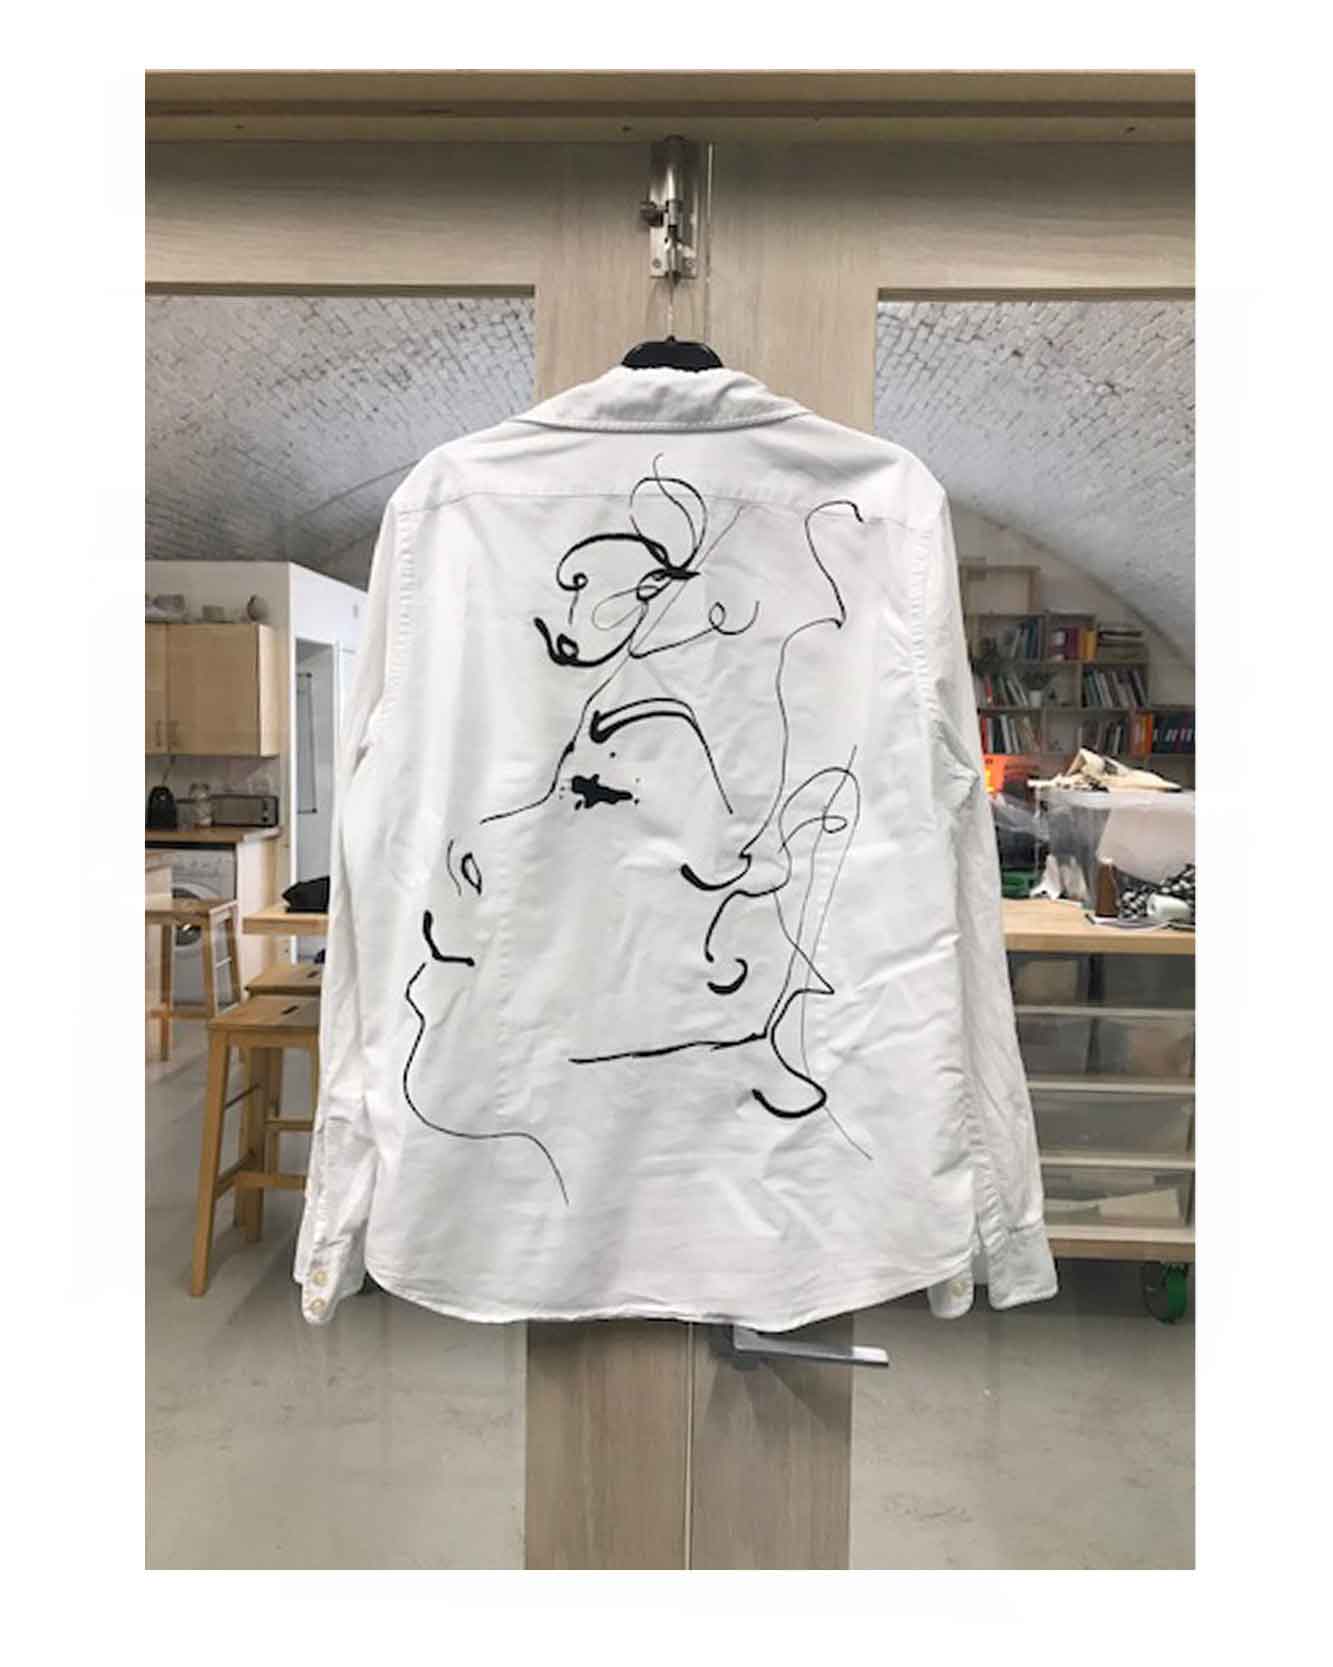 Line illustration of a women's profile embroidered onto a vintage oversized shirt.